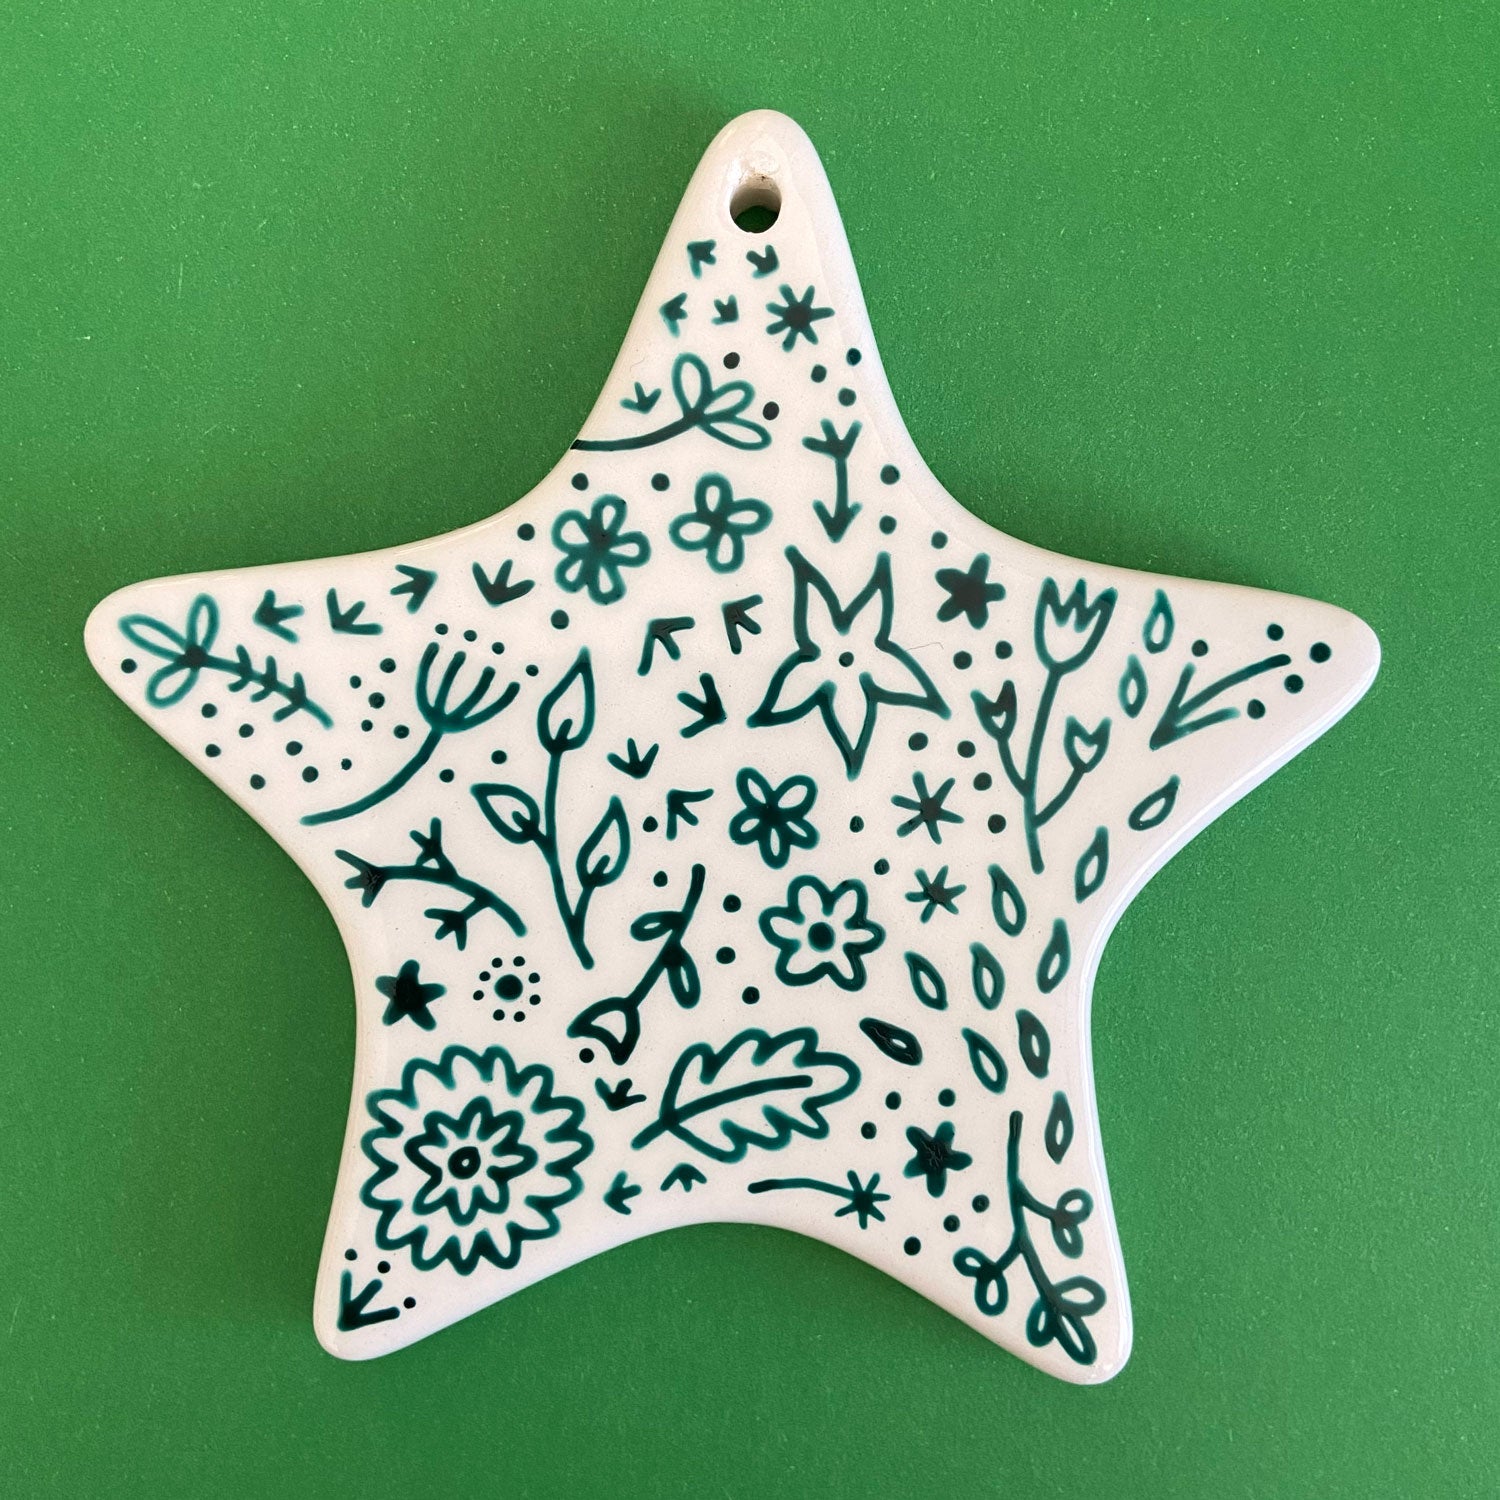 Red and Green Floral 4 - Hand Painted Star Ornament